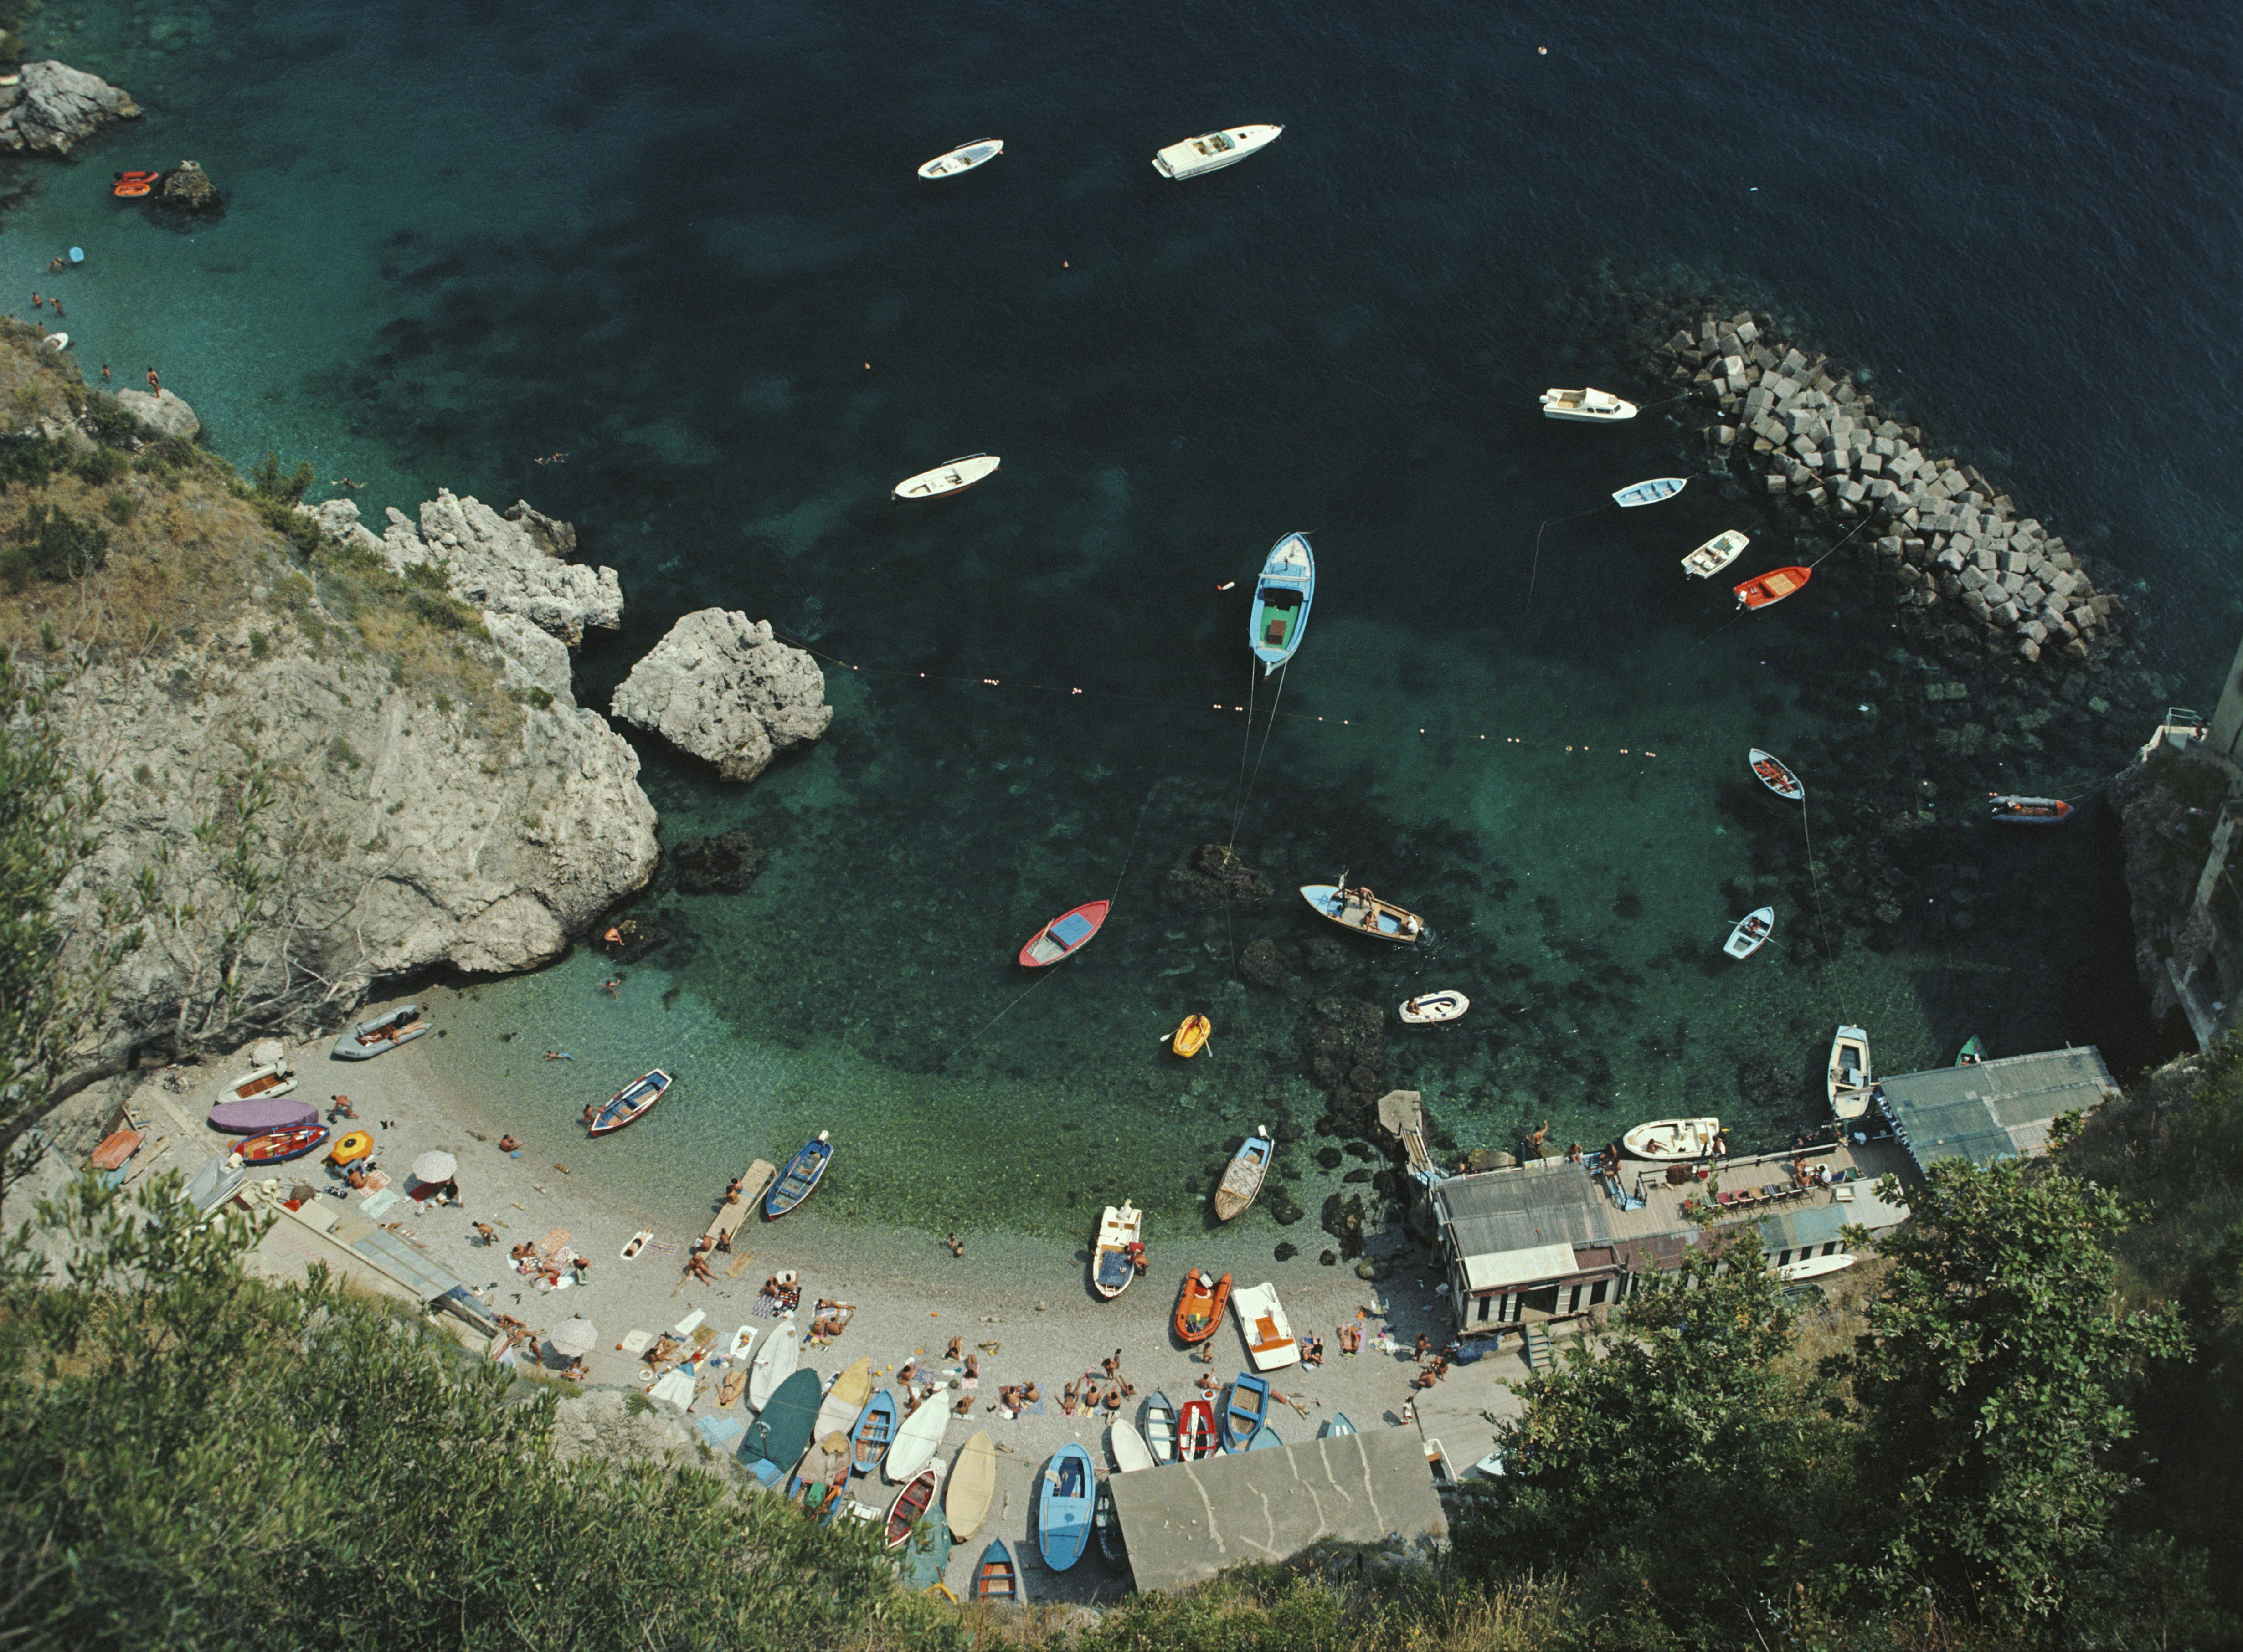 Slim Aarons
Conca dei Marini, 1984
C-print
Estate edition of 150
A busy bay in Conca dei Marini, on the Amalfi coast in Italy, August 1984. 

Estate stamped and hand numbered edition of 150 with certificate of authenticity from the estate.   

Slim